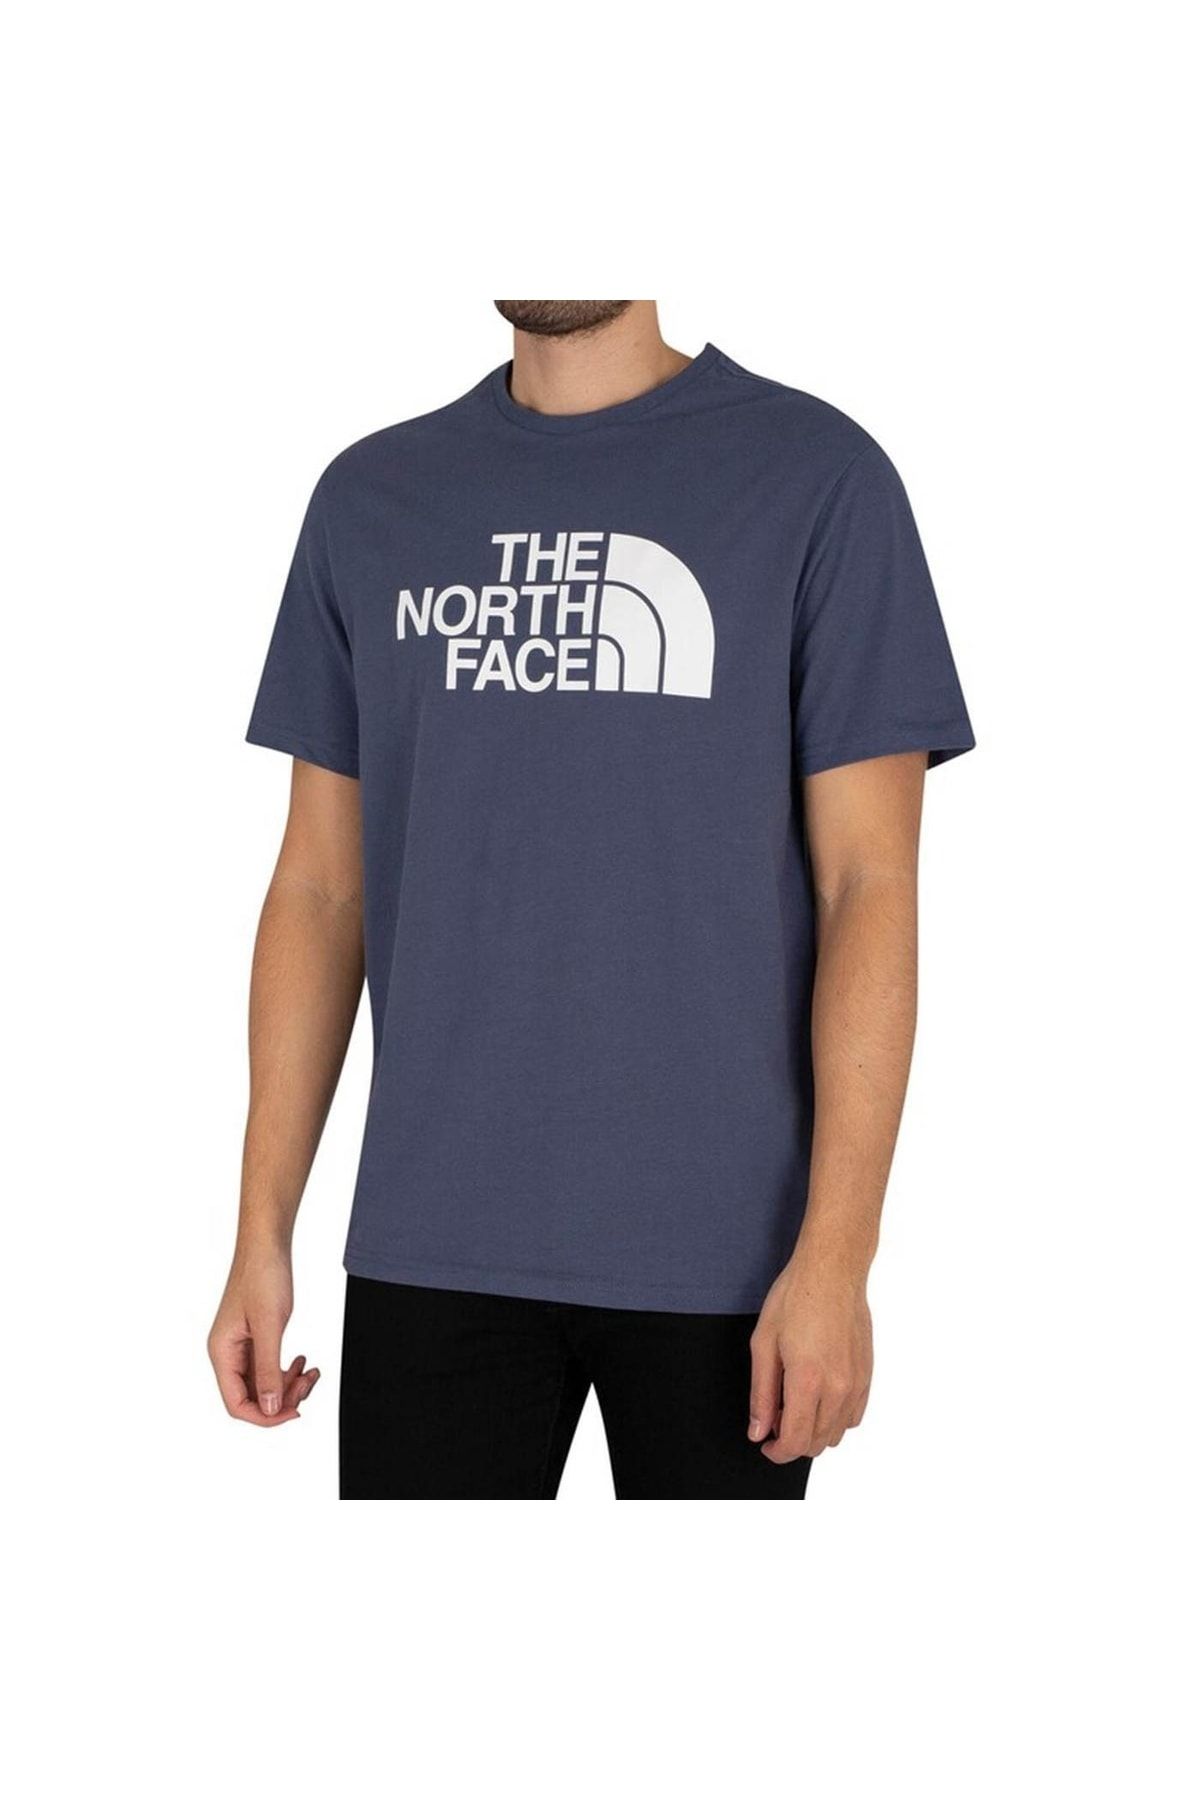 The North Face M S/s Half Dome Tee Nf0a4m8nwc41